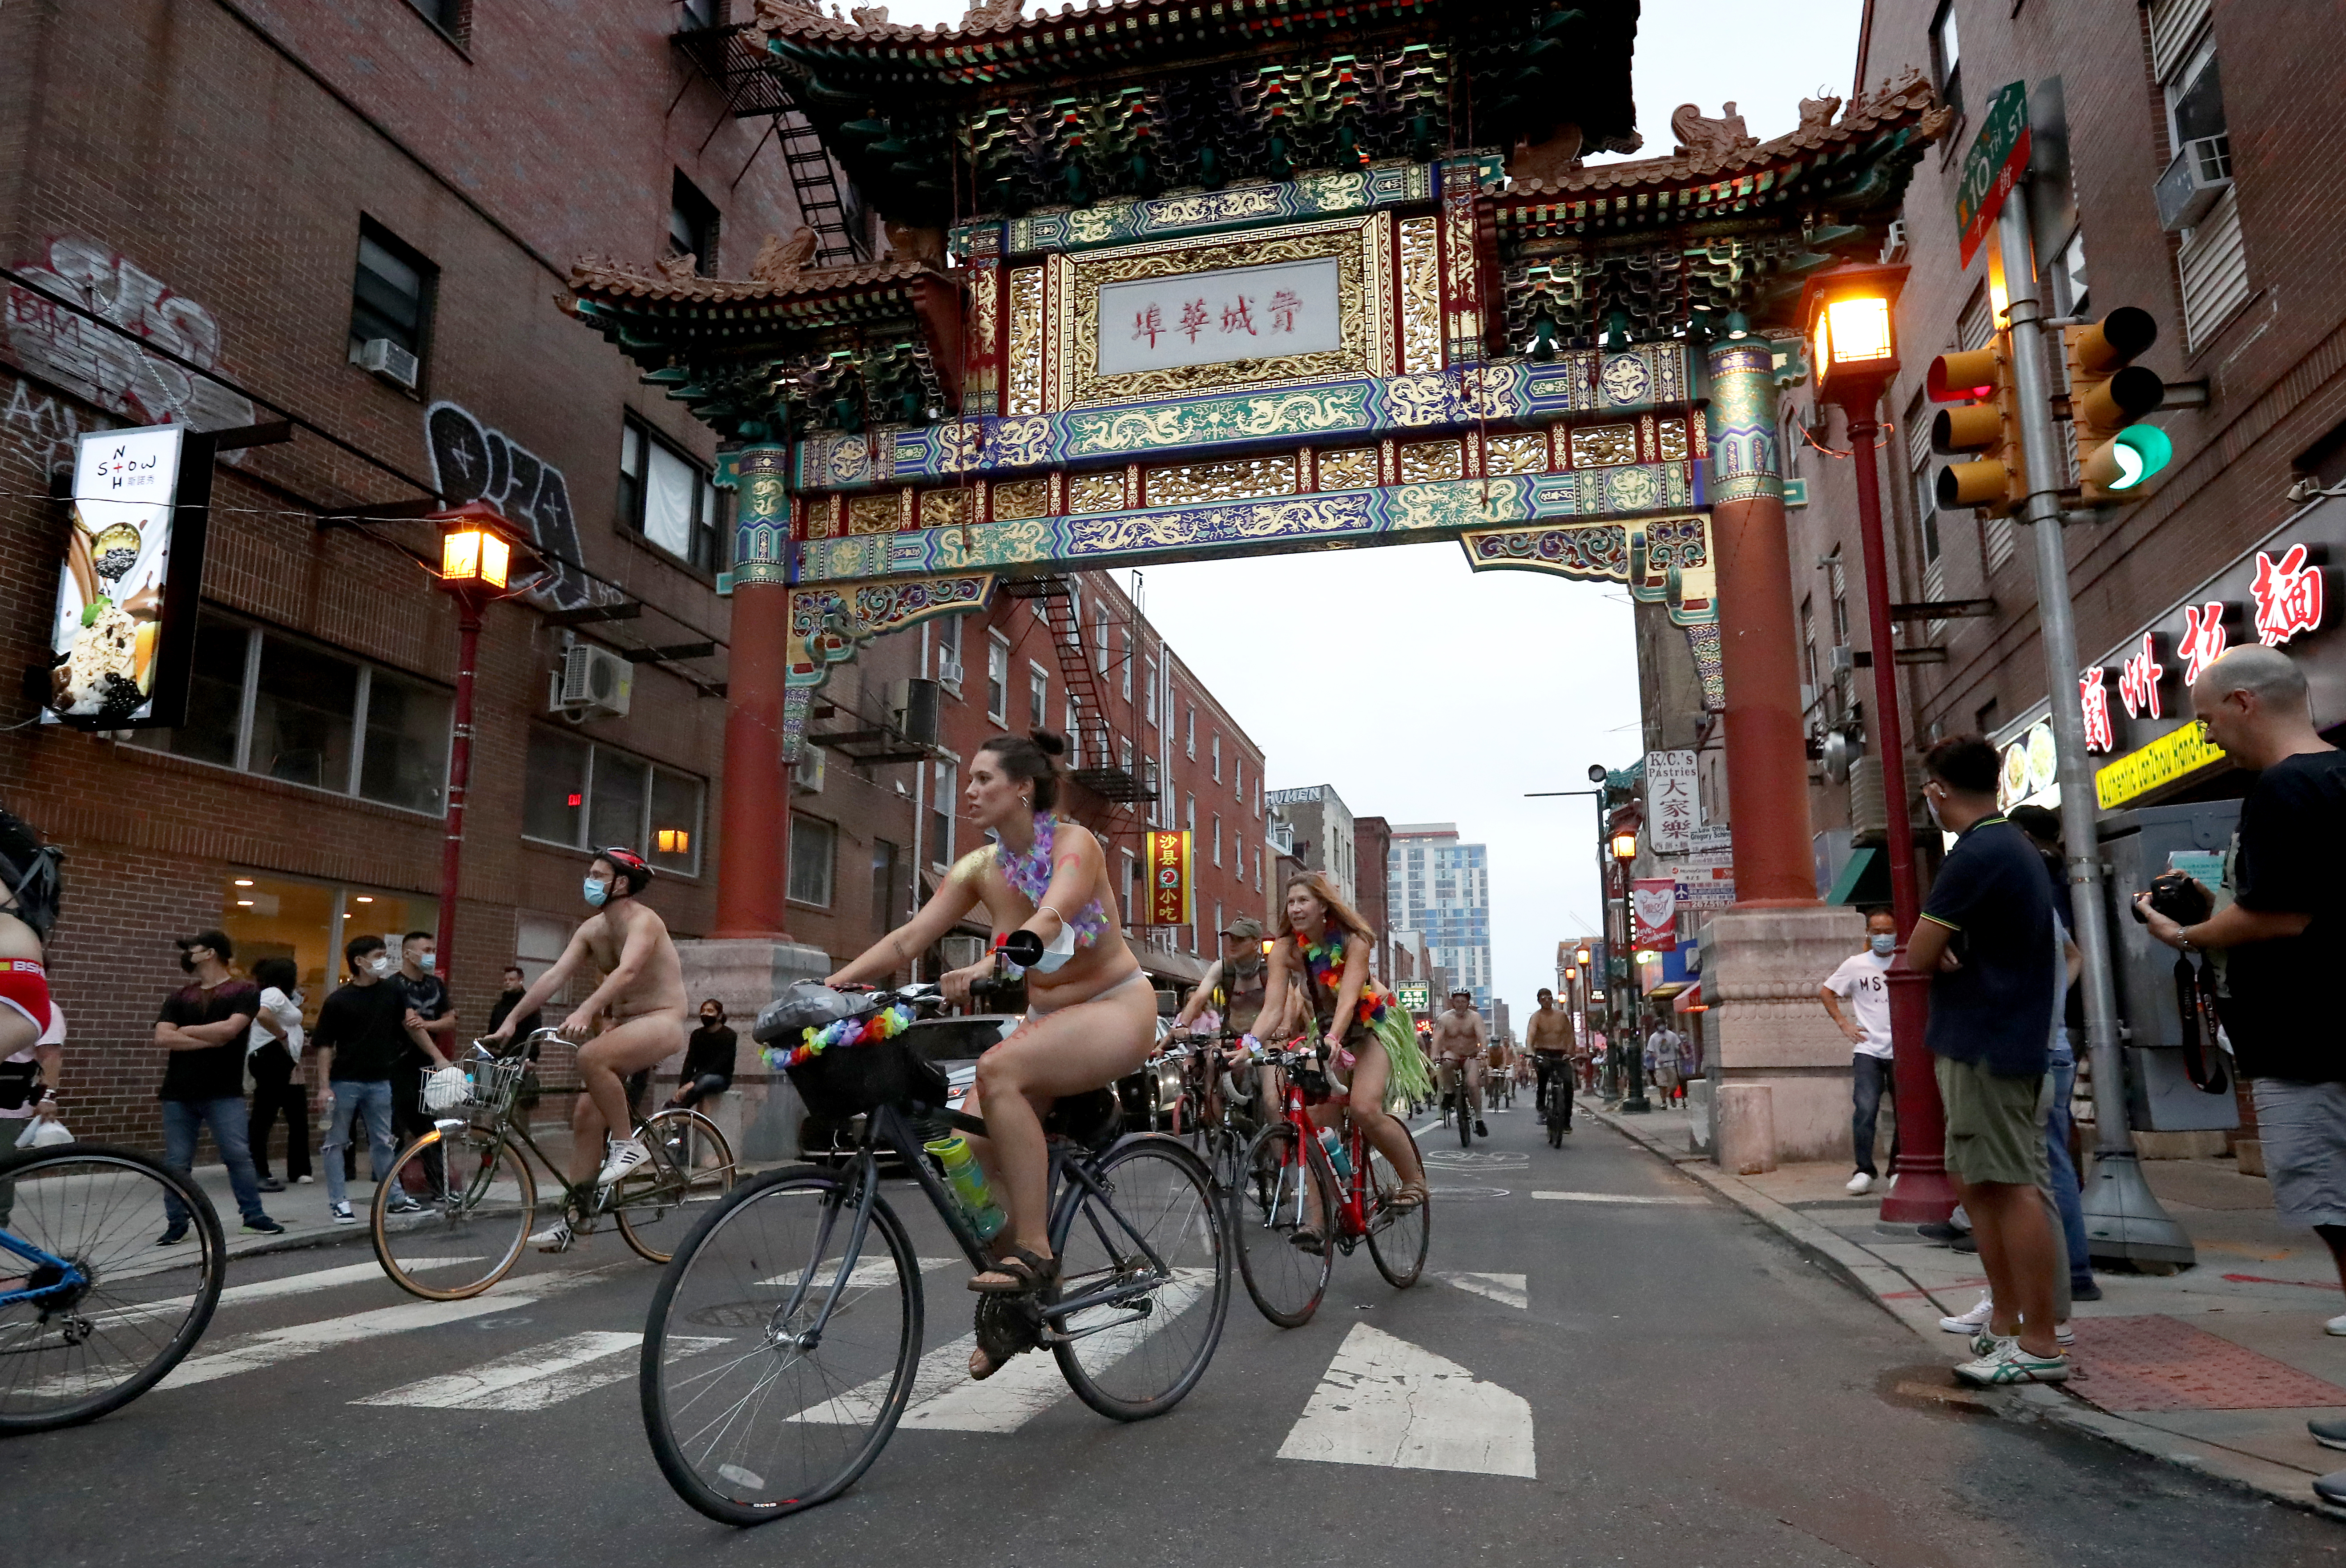 People ride bikes along 10th Street and under the Chinatown Friendship Arch in Philadelphia during the Philly Naked Bike Ride, Saturday, Aug. 28, 2021.